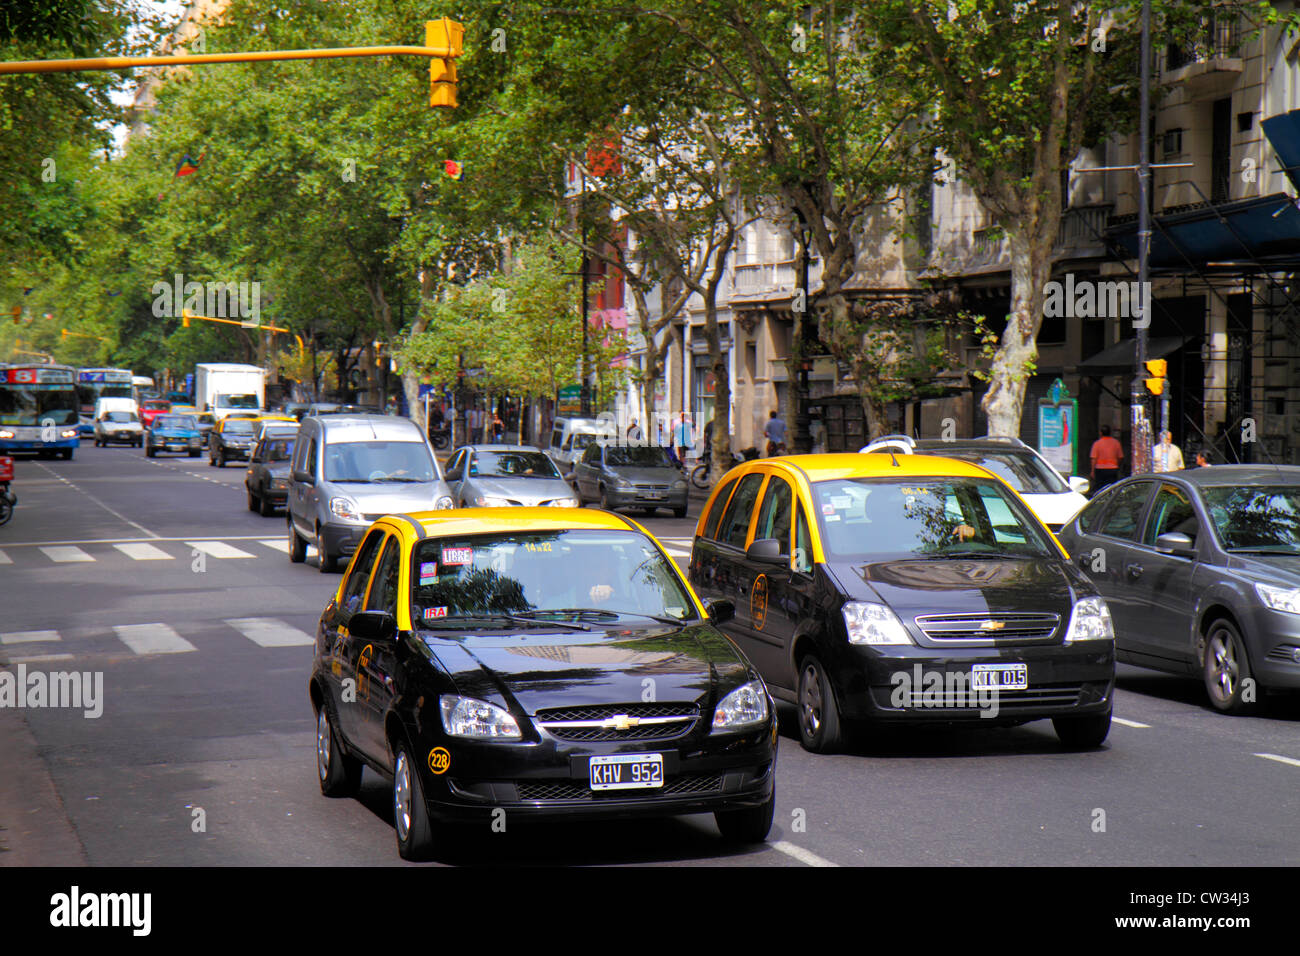 Buenos Aires Argentina,Avenida de Mayo,district,street scene,tree lined avenue,traffic,one way,car,auto,taxi,taxis,cab,cabs,Black yellow,transportatio Stock Photo